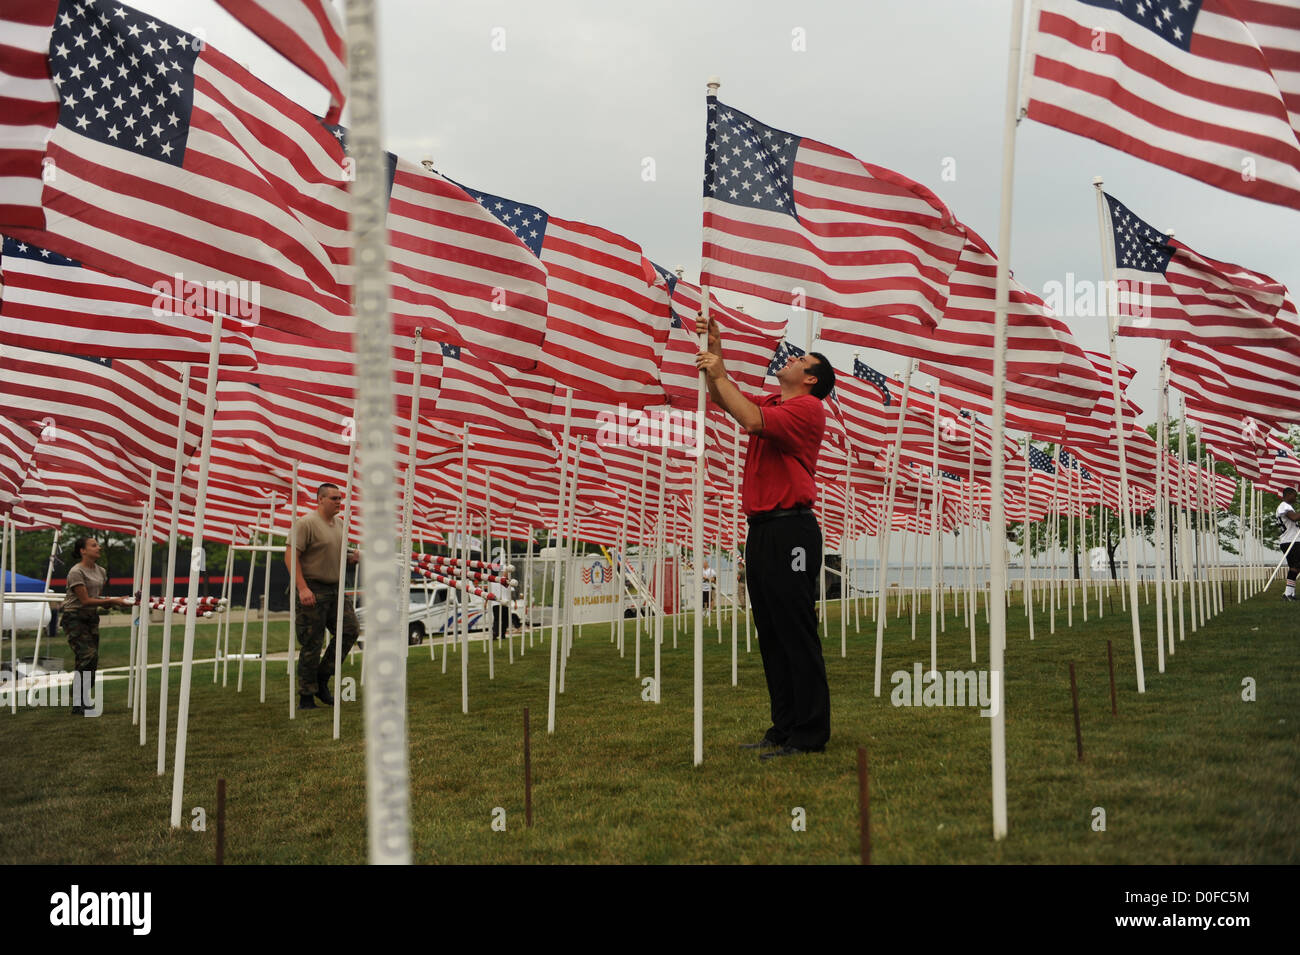 Volunteers set up flags at a memorial to Ohio service members killed during Operations Iraqi Freedom and Enduring Freedom June 11, 2012 at Voinovich Park in Cleveland Ohio. Stock Photo